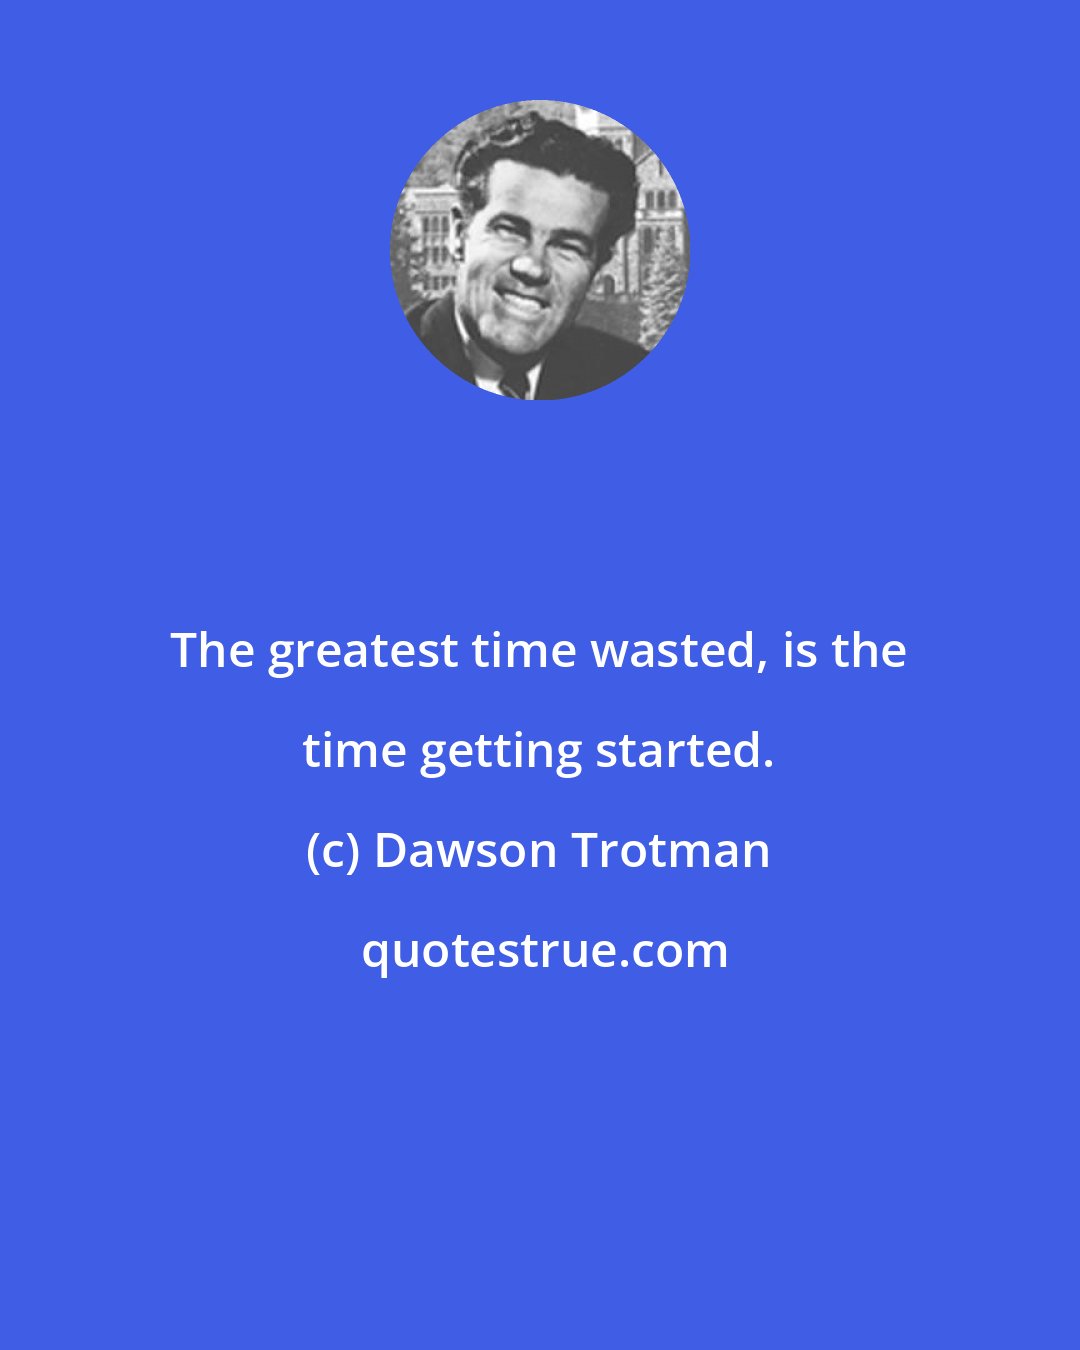 Dawson Trotman: The greatest time wasted, is the time getting started.